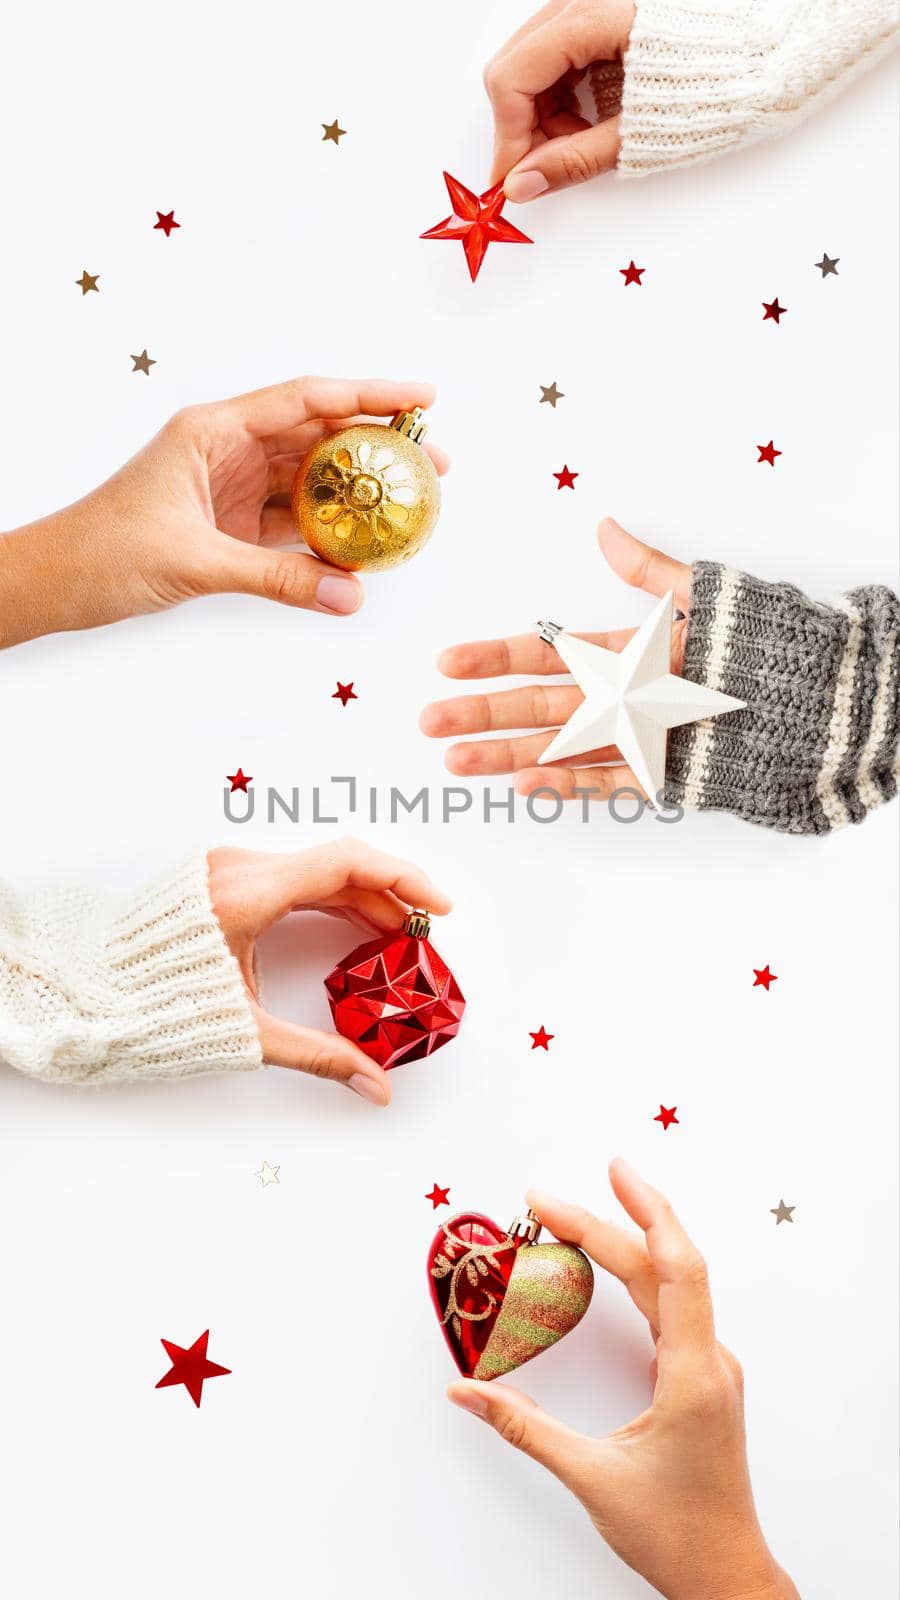 Hands with New Year decoration - red heart, golden ball, white star on white background. Top view on decoration for Christmas tree. Vertical banner 9:16.